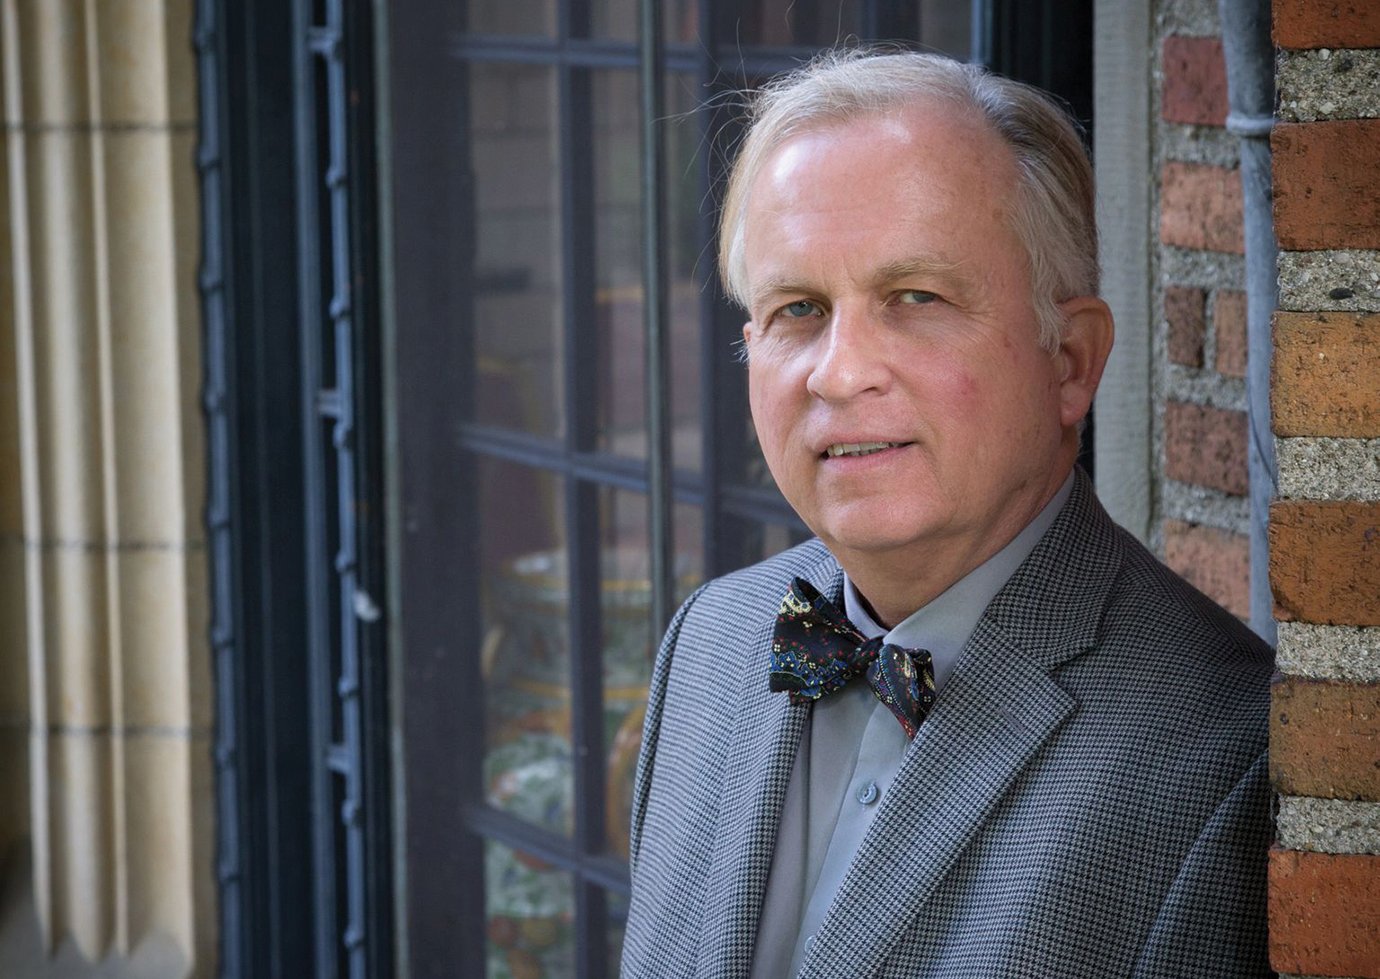 Mark Bowers dressed up with a bow tie leans up against a brick wall at Meadow Brook Hall